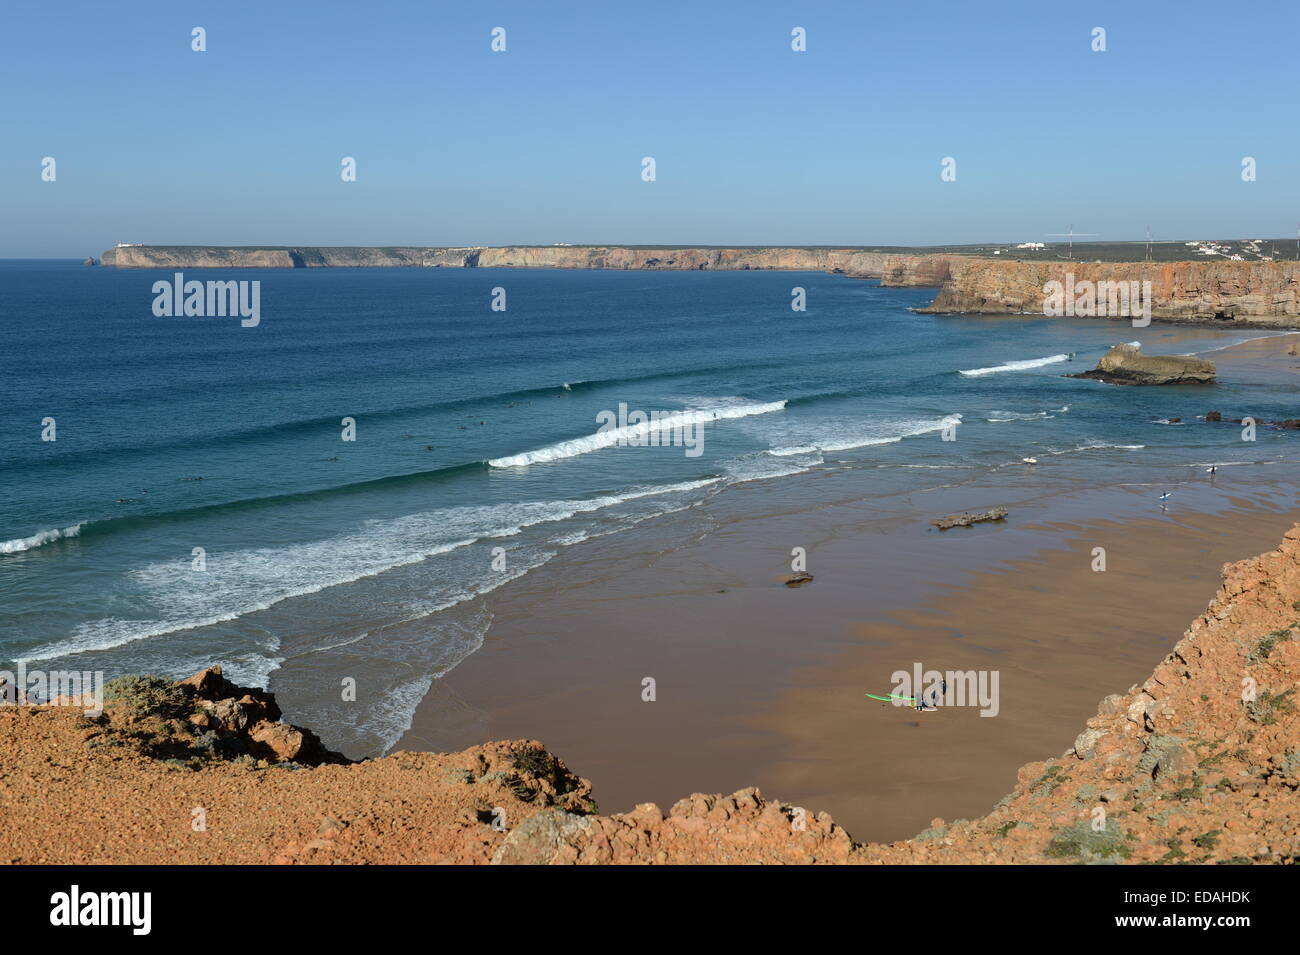 perfect  surfing conditions at  Tonel Beach Sagres with Cape St. Vincent lighthouse in background Stock Photo